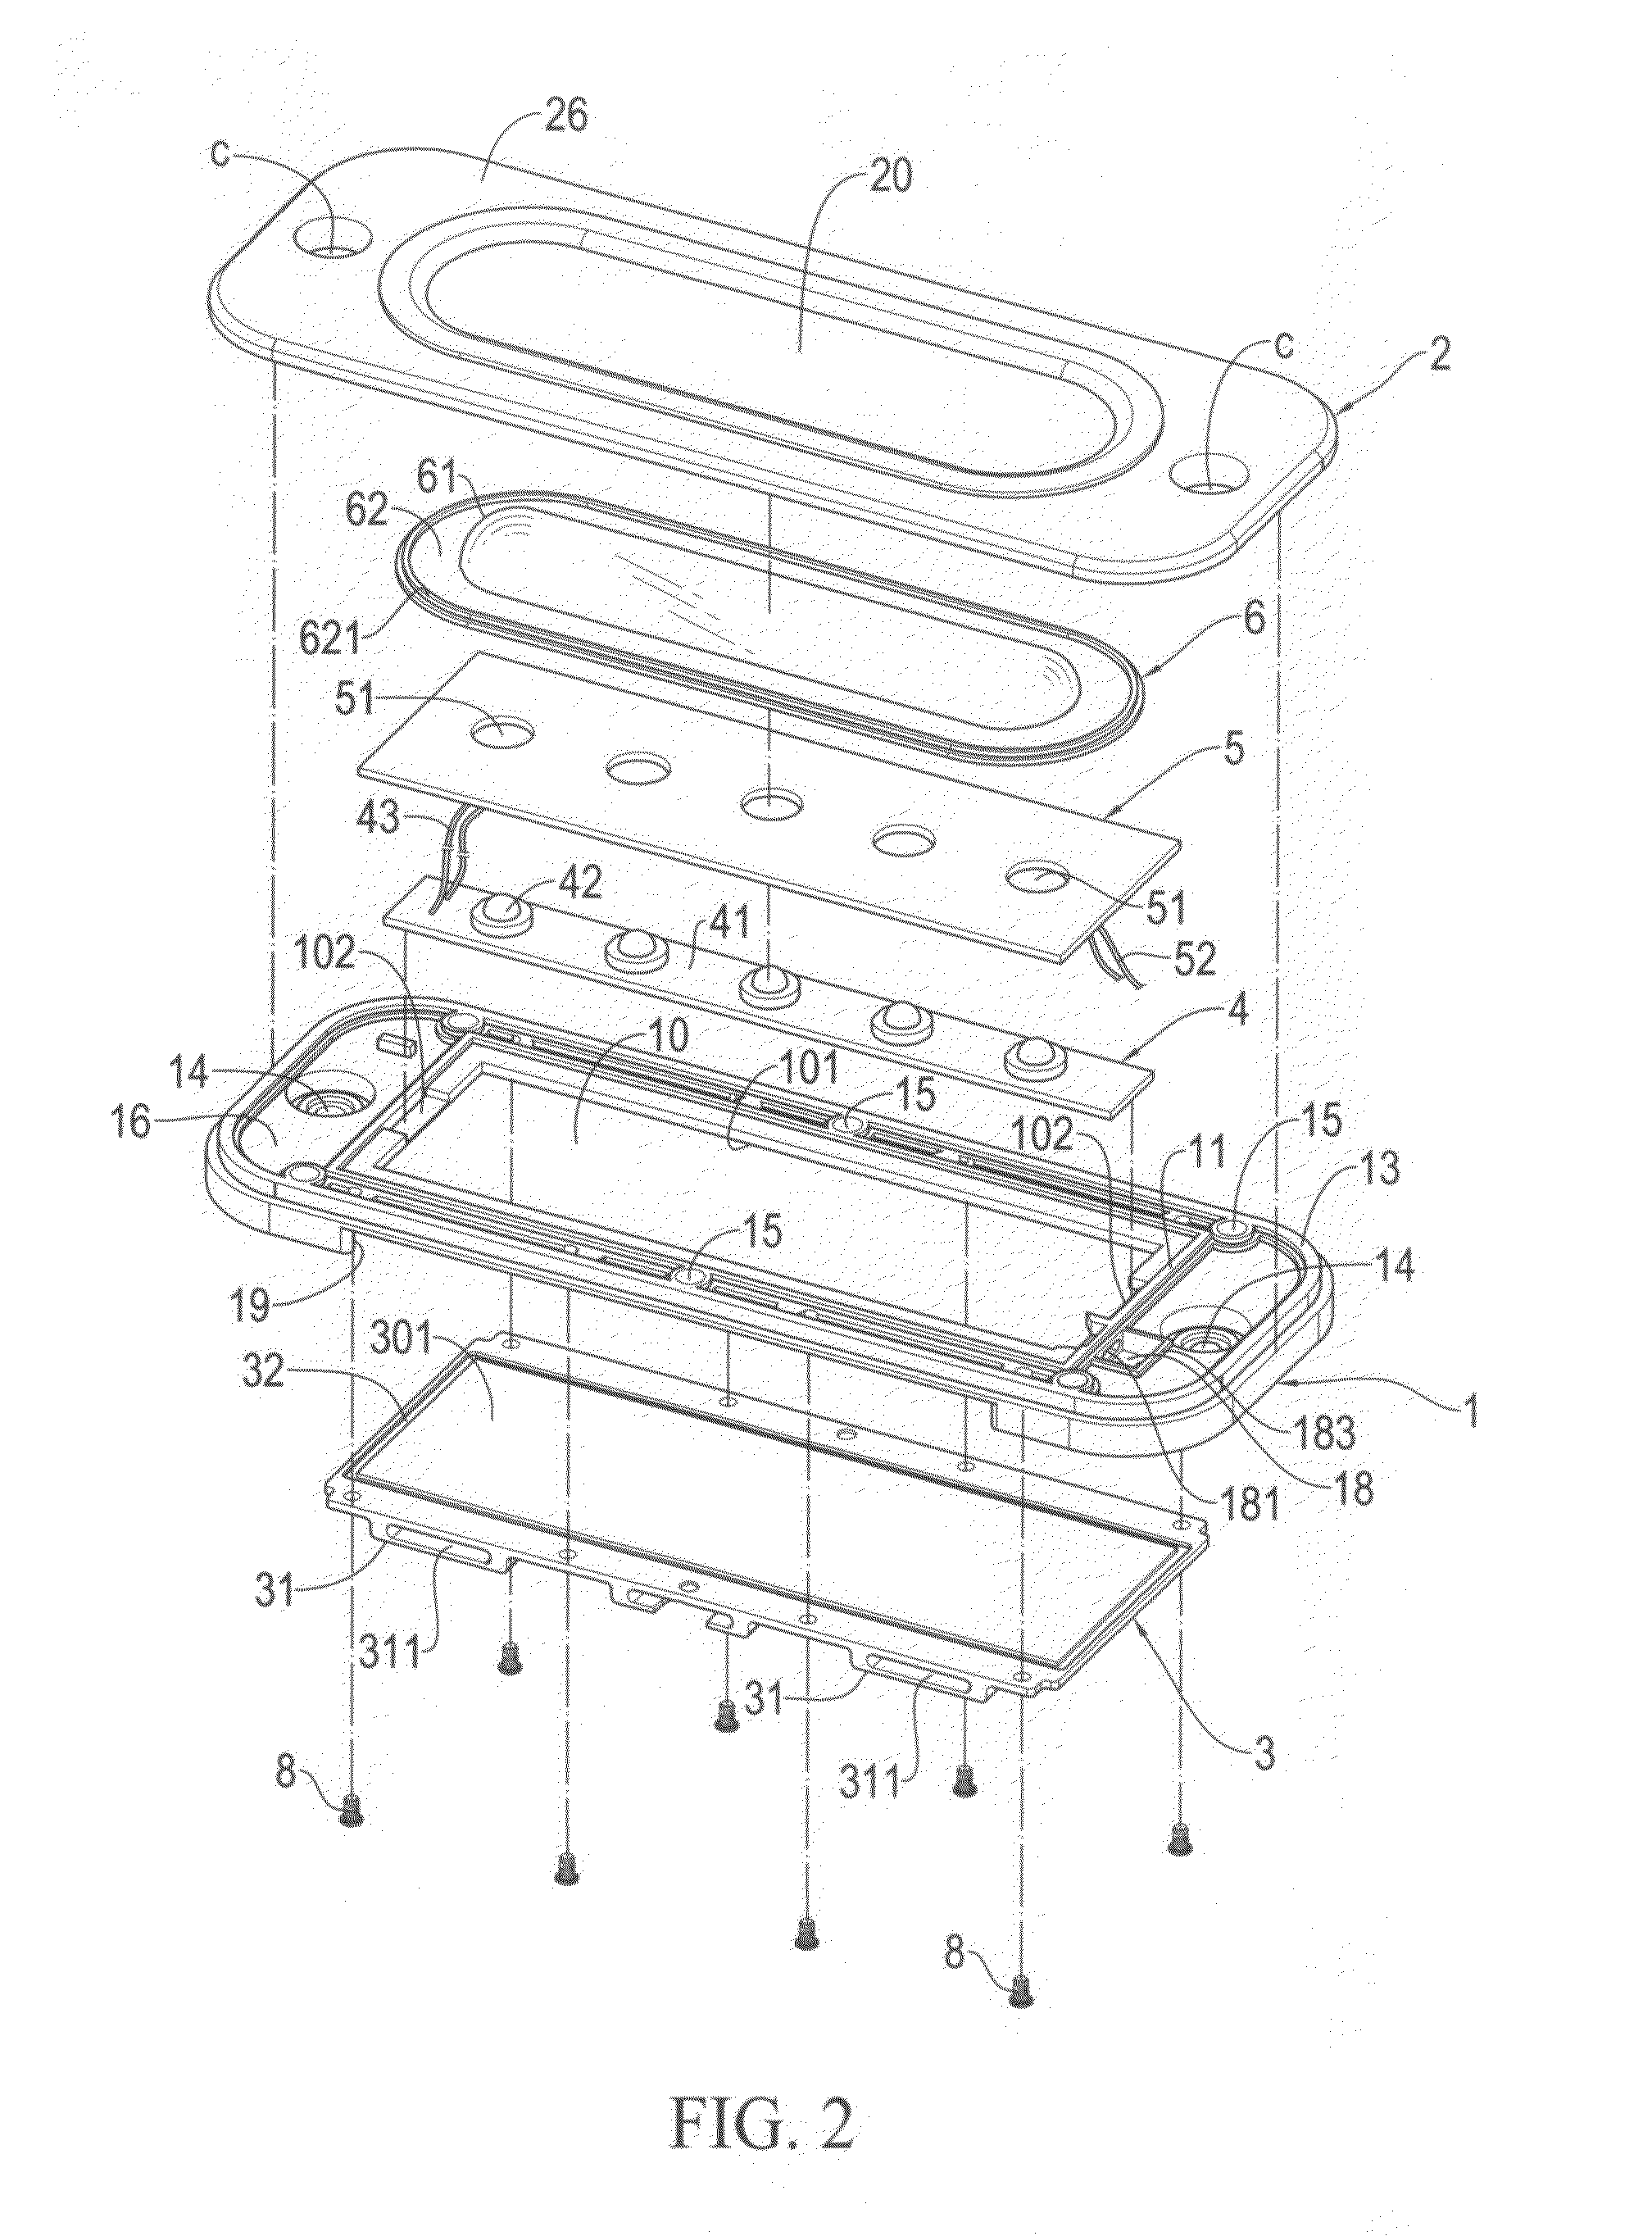 Low-profile light-emitting diode lamp structure